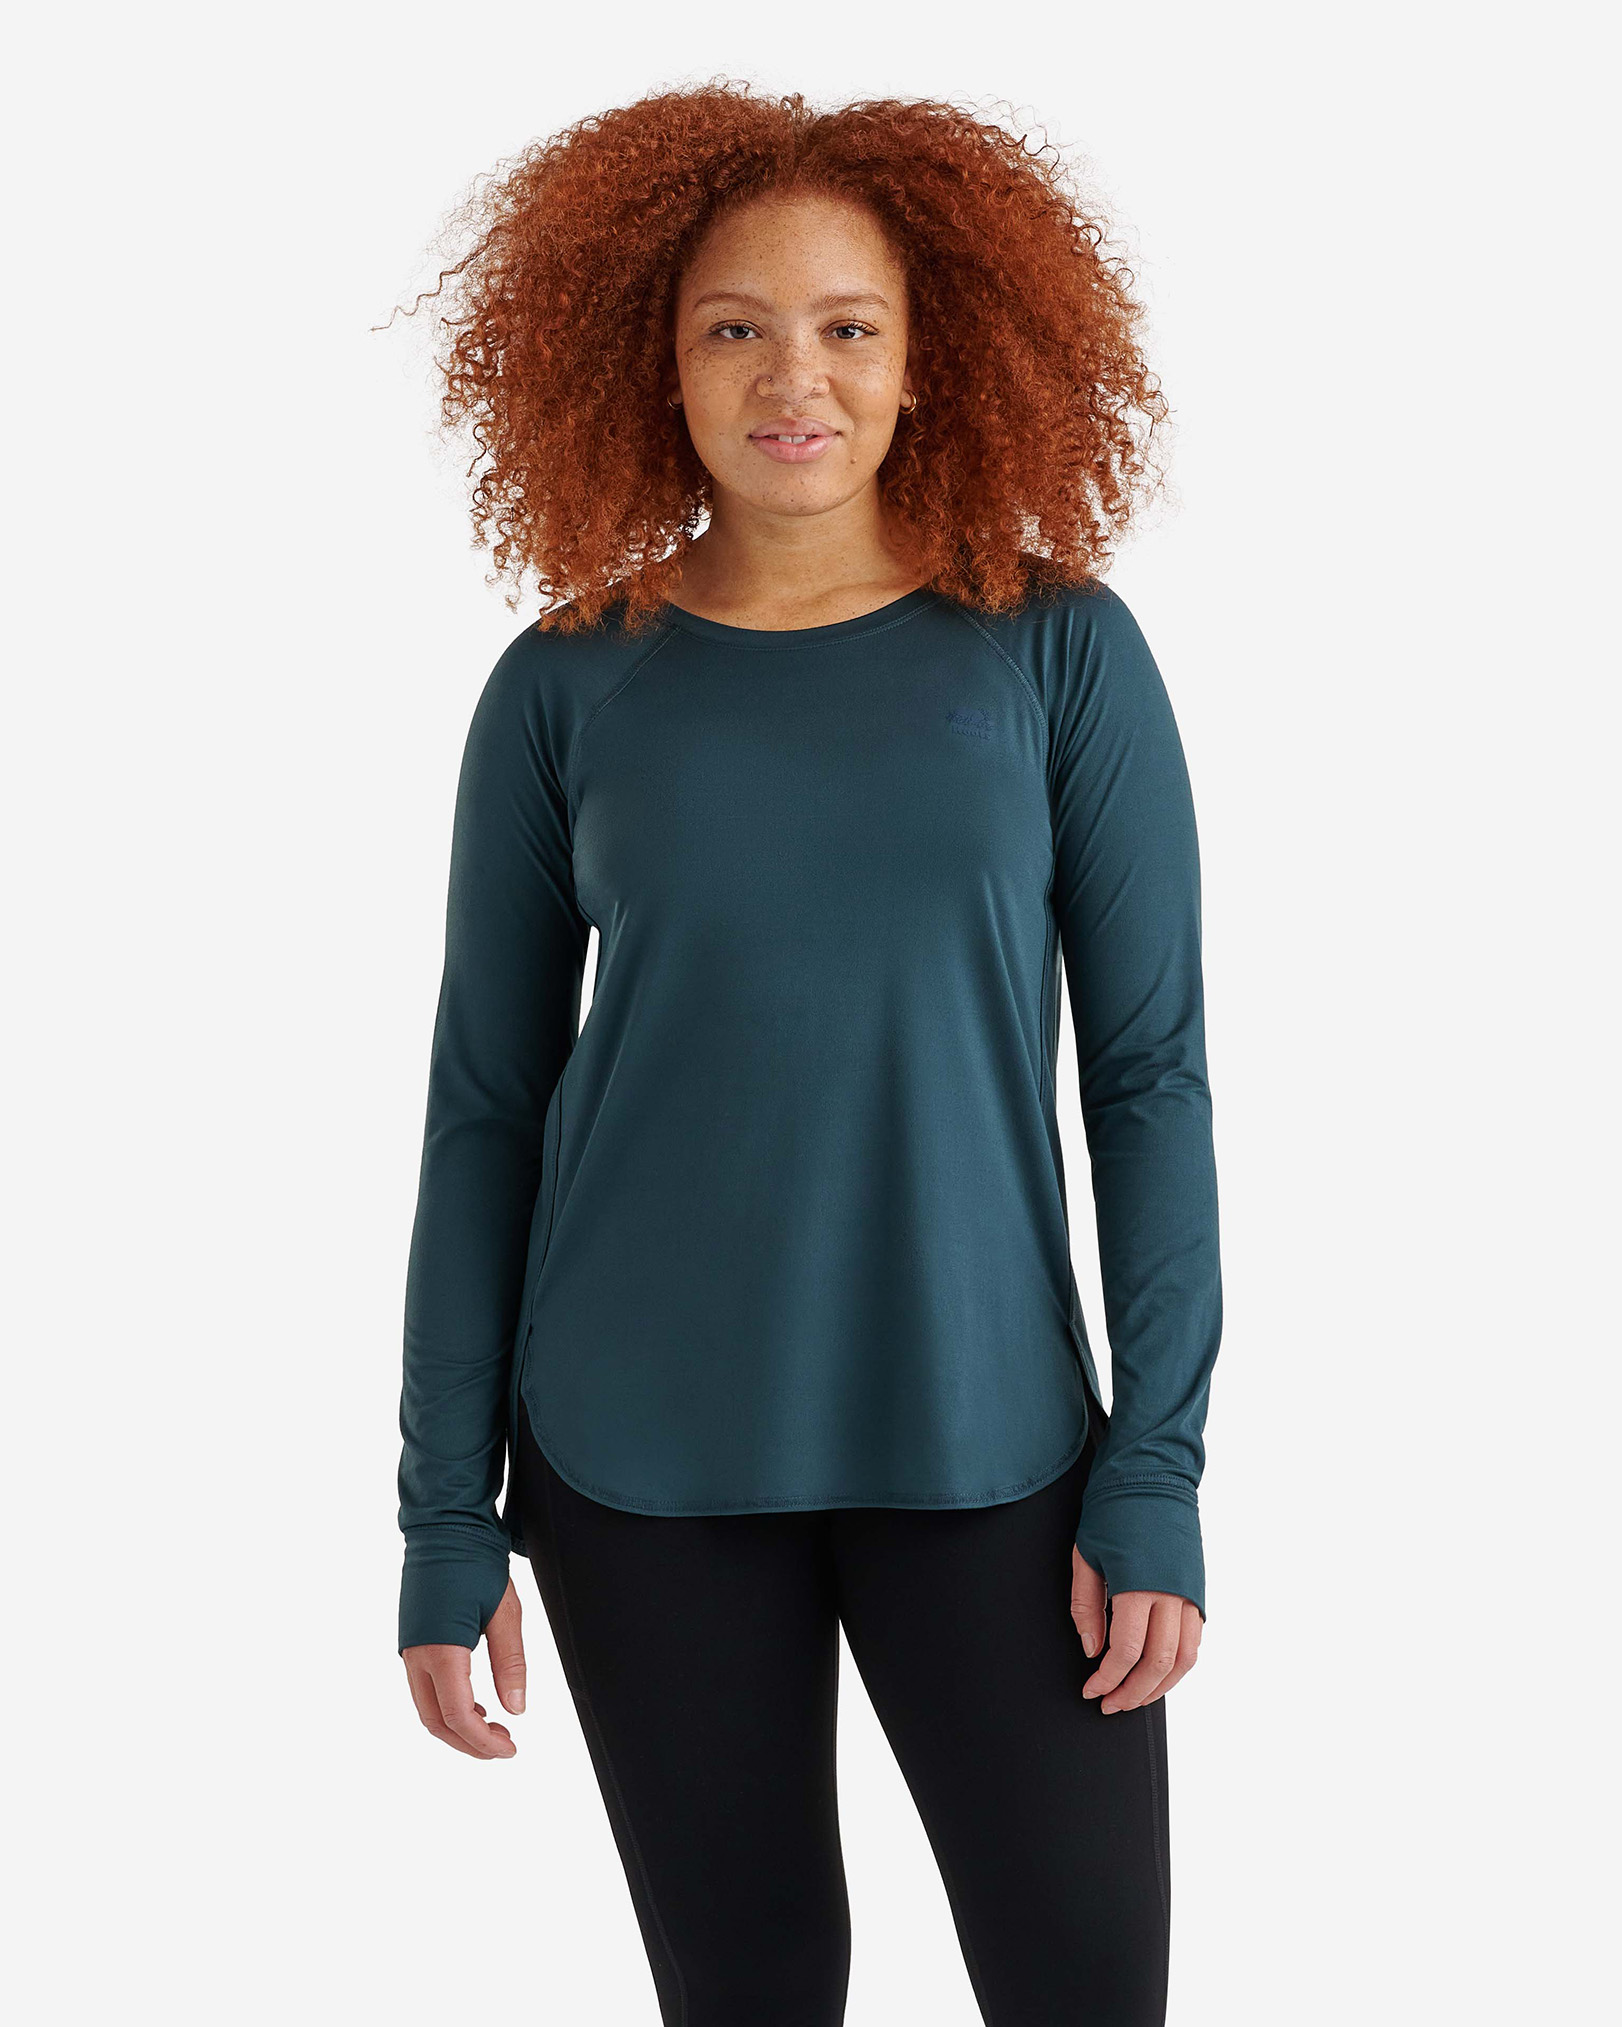 Roots Renew Long Sleeve Top in Forest Teal